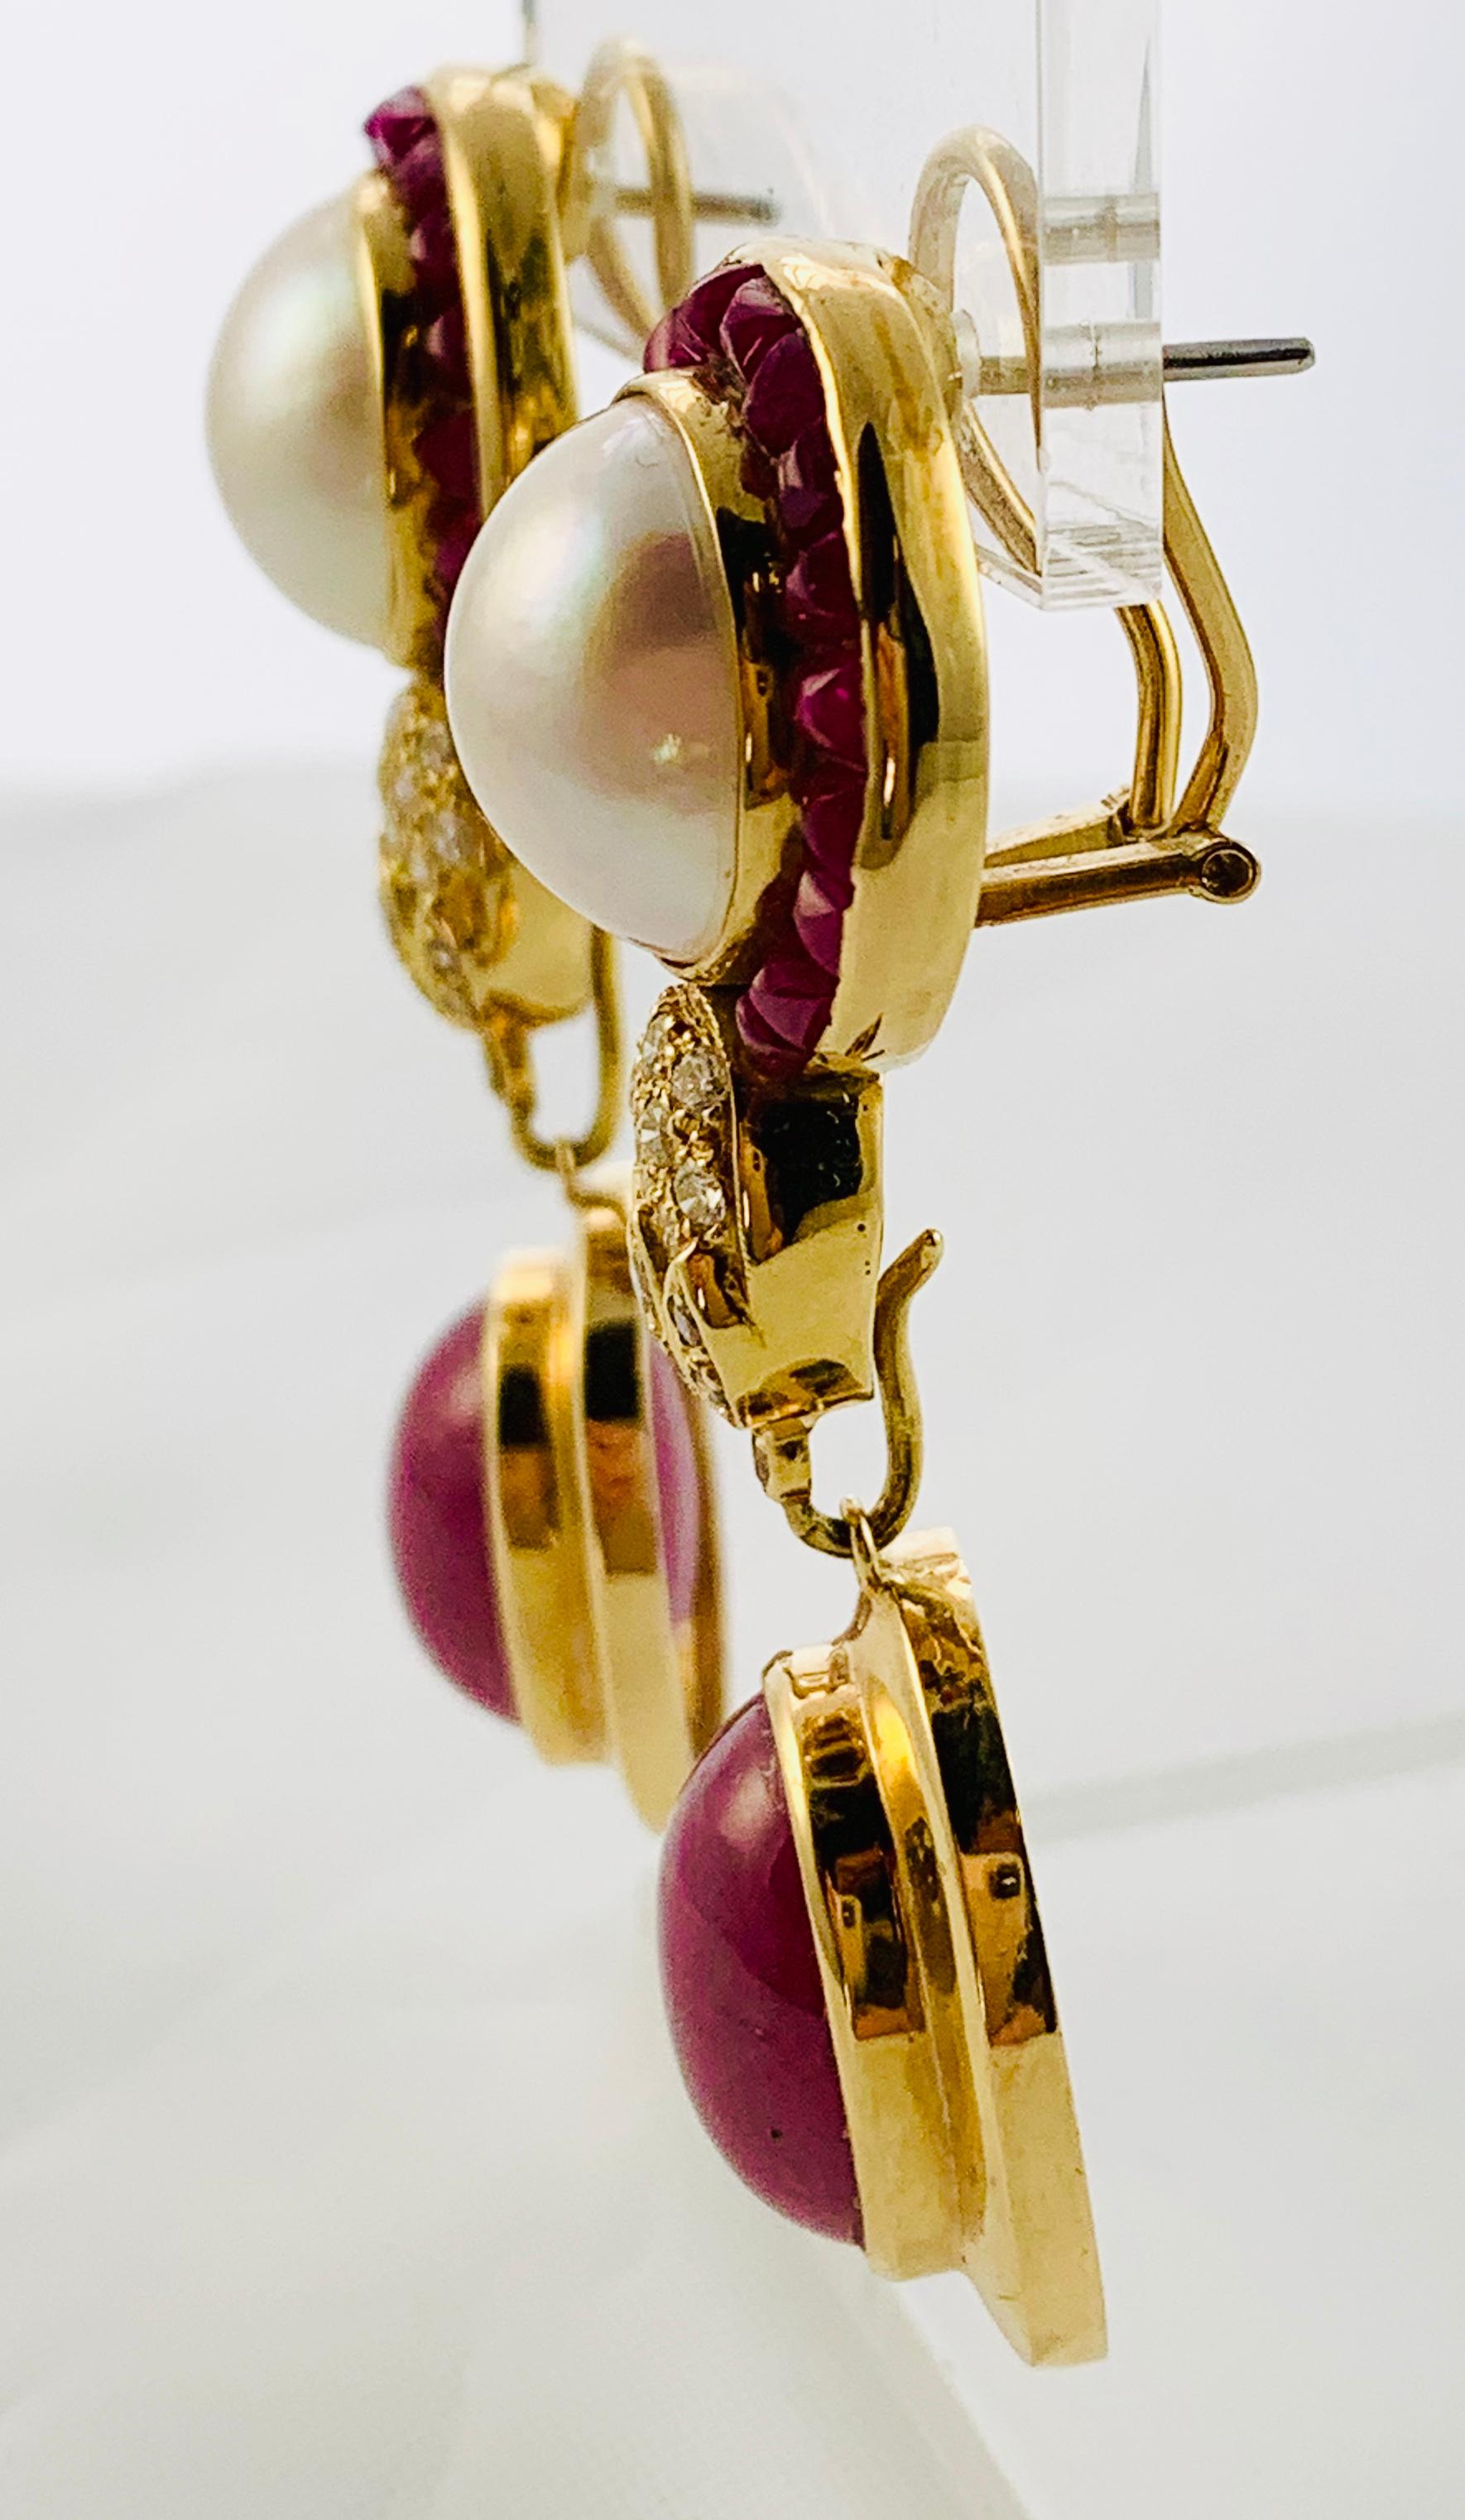 Gorgeous Drop Earrings!!! Made in 18K yellow Gold, they have three tiers. The top tier features  a 14mm Mobe Pearl That is surrounded by Calibre Cut Rubies. The middle connector tier has 17 round diamonds. The bottom, removable dangle features  a